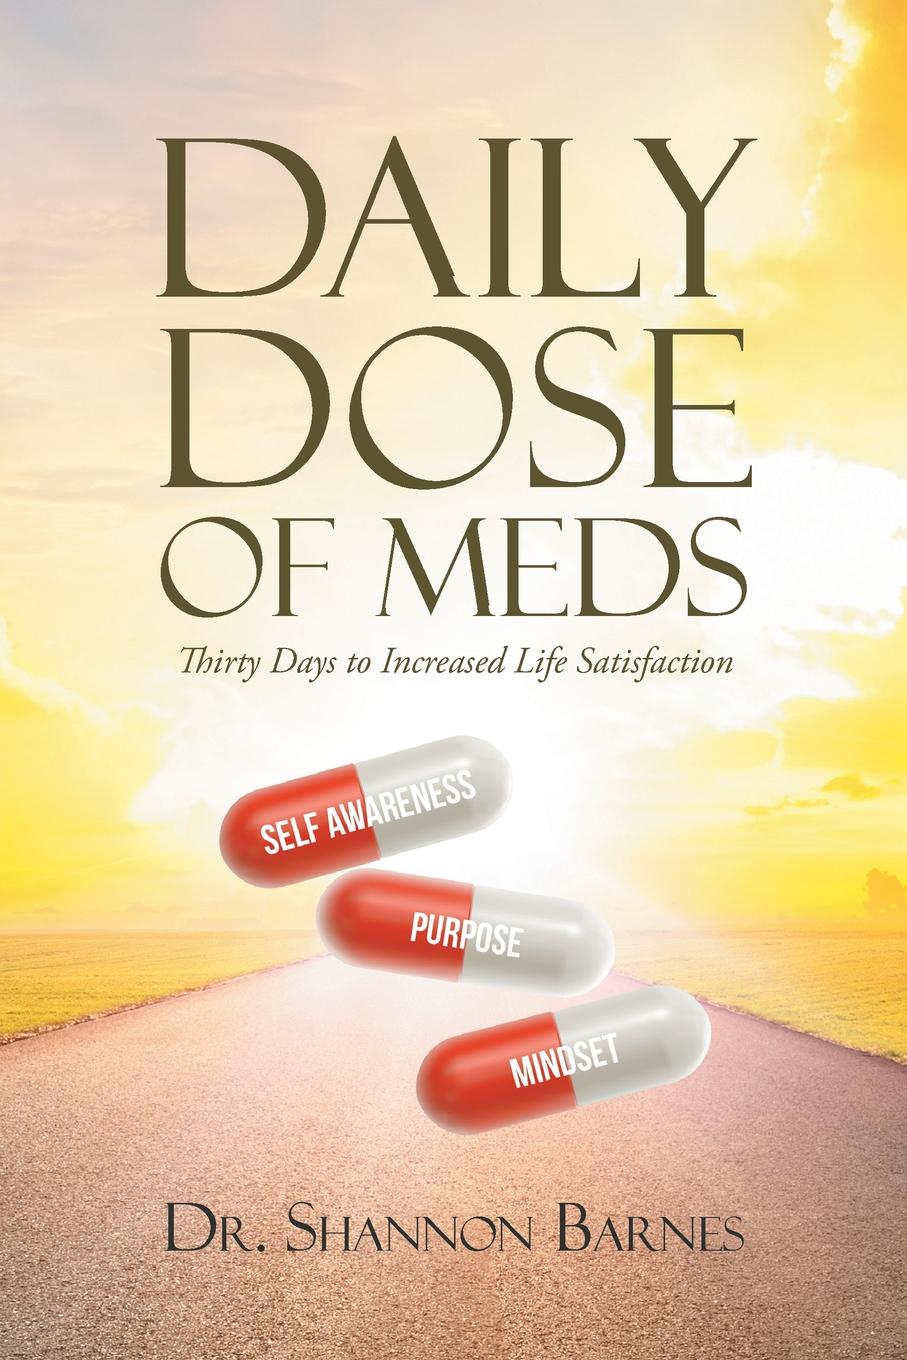 Thirty Days. Daily dose. Daily Happiness. Meds.